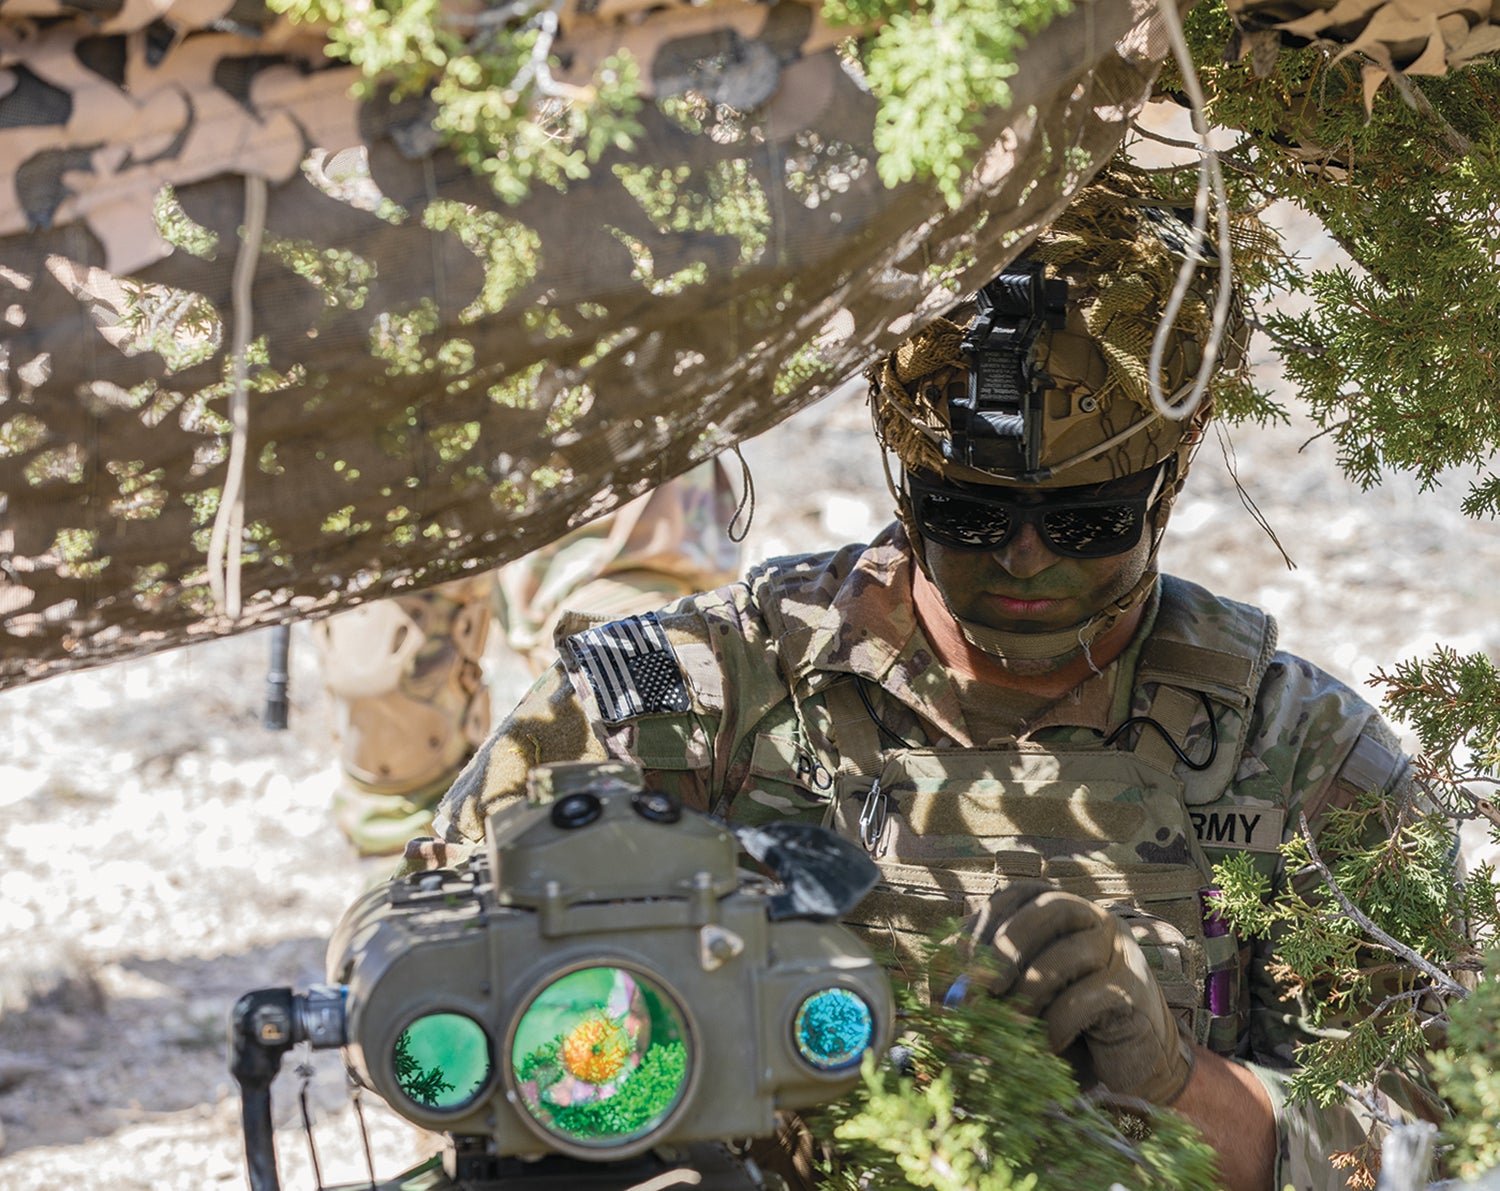 Sgt. Andrew Polich, of the 2nd Stryker Brigade Combat Team, 4th Infantry Division, uses a Lightweight Laser Designator Rangefinder at his observation post during the division’s Ivy Mass exercise at Fort Carson, Colorado. (Credit: U.S. Army/U.S. Army/Sgt. Woodlyne Escarne)